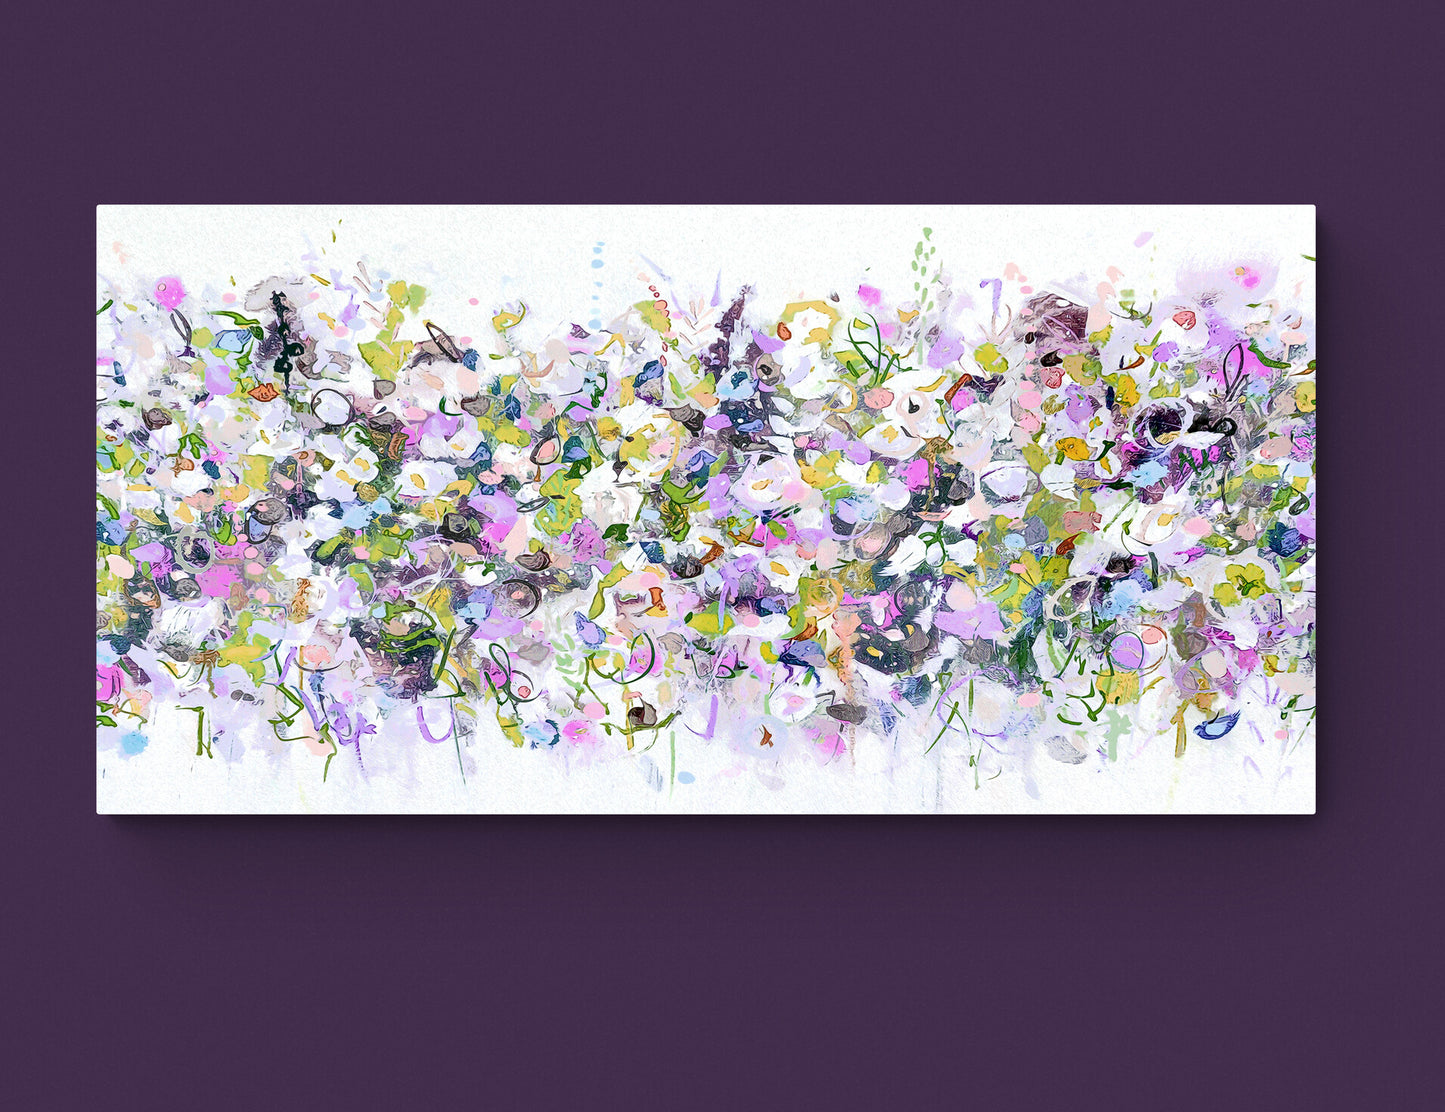 Pink, Purple and White Abstract Floral Art Panoramic Giclee Print on Stretched Canvas